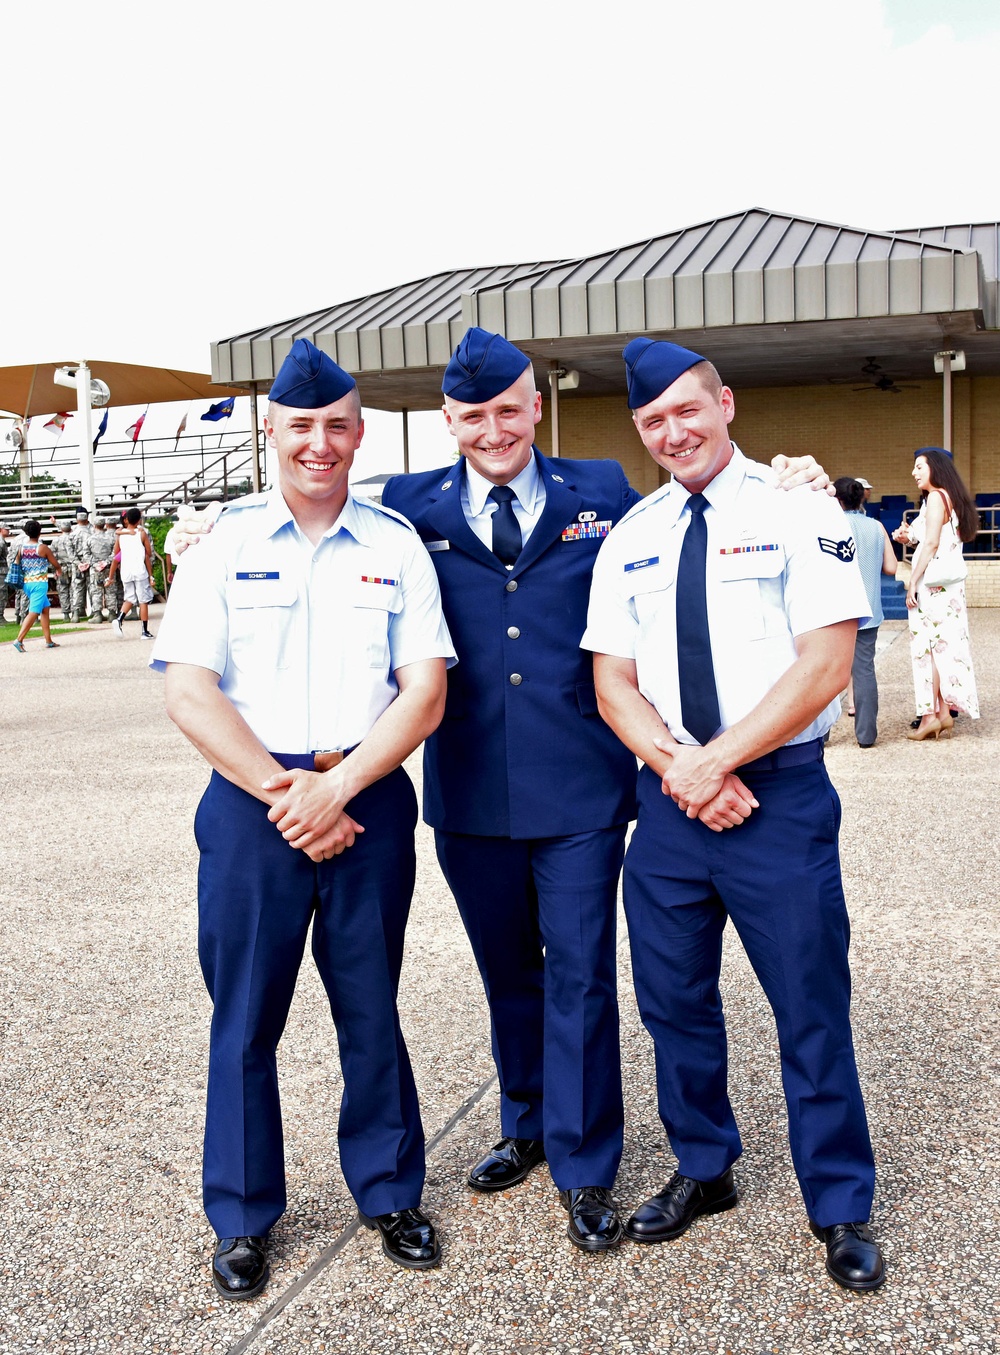 Brothers in arms: A story of three Airmen